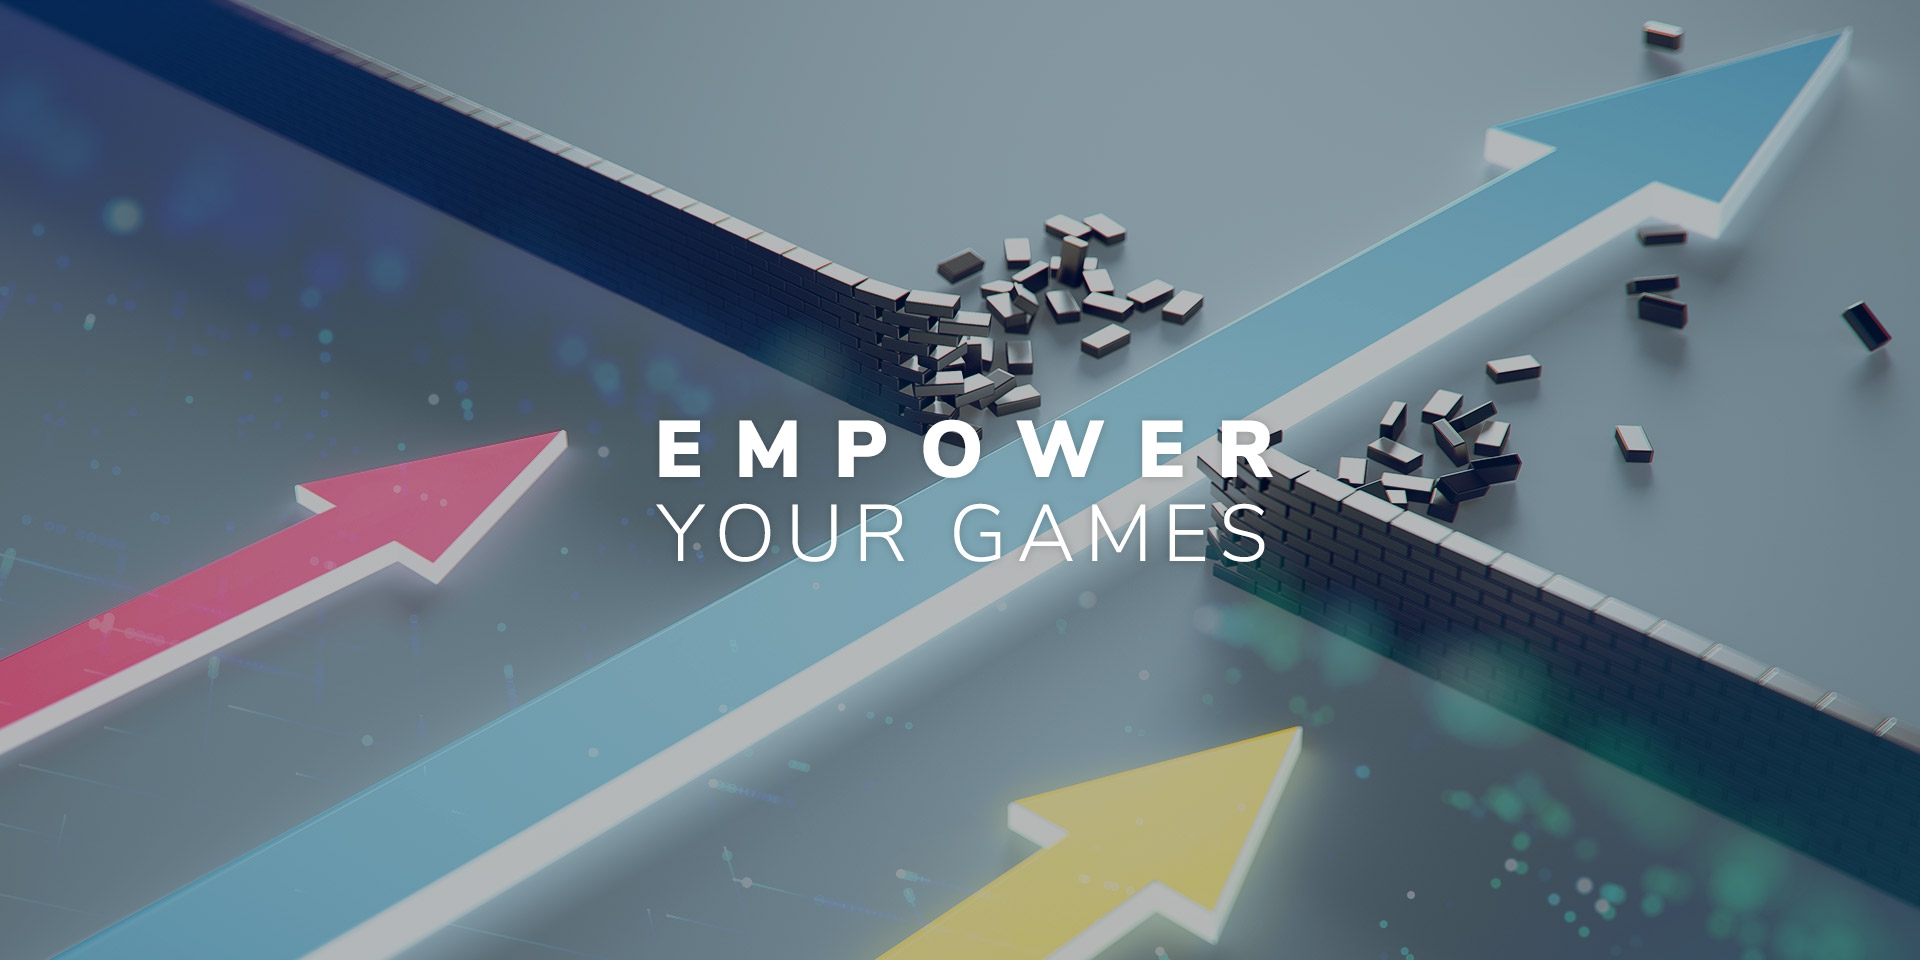 EMPOWER YOUR GAMES(Image)